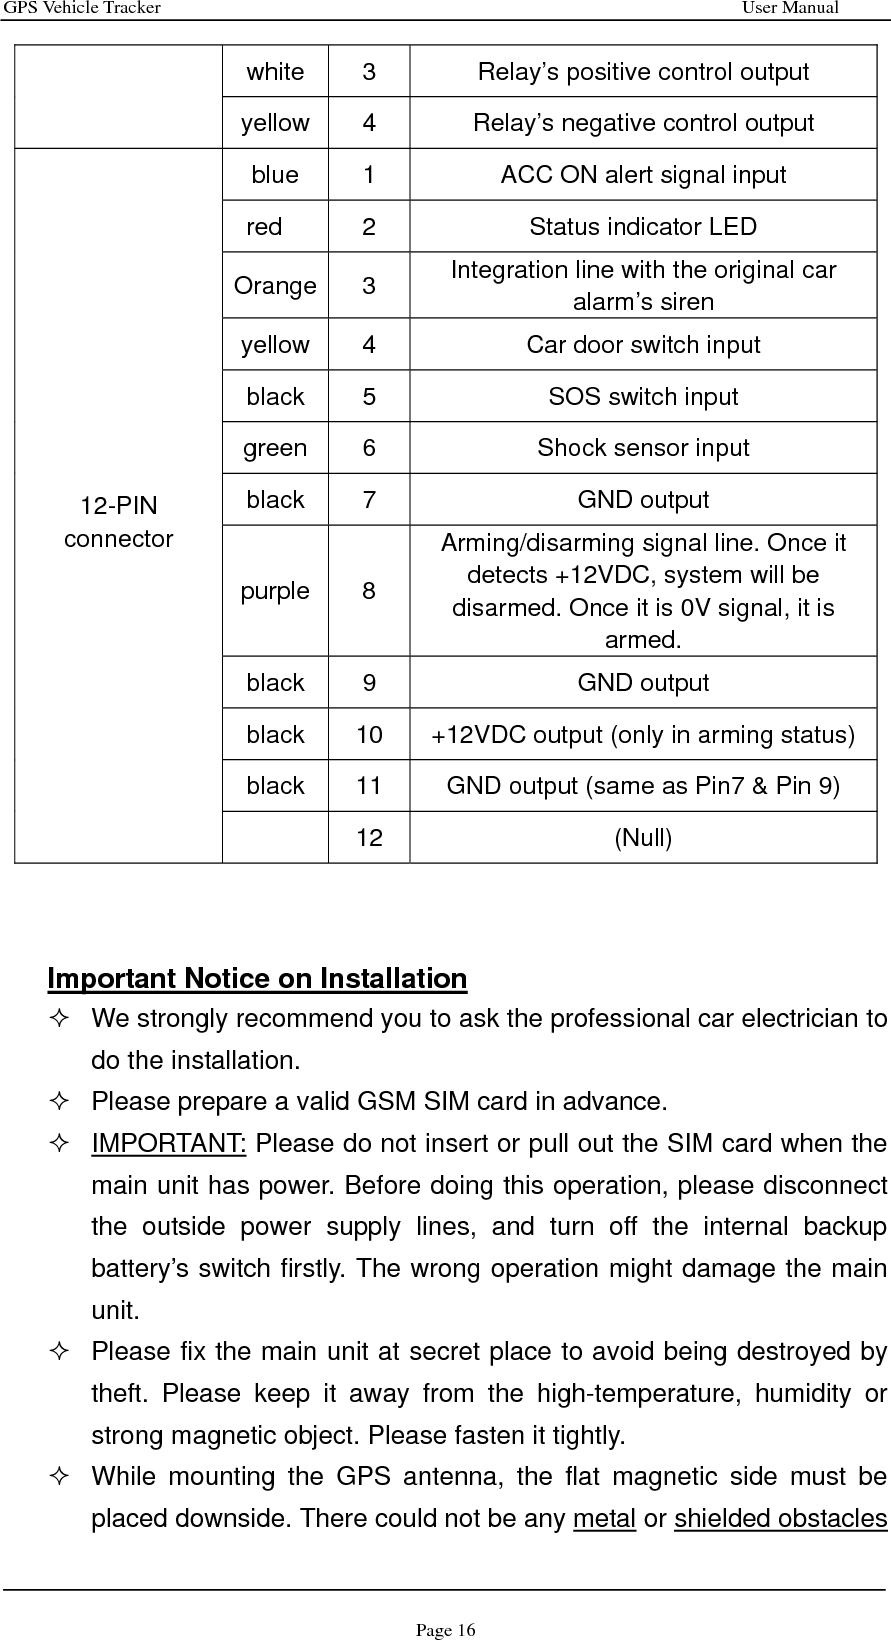 GPS Vehicle Tracker                                                              User Manual Page 16 white  3  Relay’s positive control output yellow 4  Relay’s negative control output blue  1  ACC ON alert signal input red  2  Status indicator LED Orange 3  Integration line with the original car alarm’s siren yellow  4  Car door switch input black  5  SOS switch input green  6  Shock sensor input black 7  GND output purple 8 Arming/disarming signal line. Once it detects +12VDC, system will be disarmed. Once it is 0V signal, it is armed. black 9  GND output black  10  +12VDC output (only in arming status) black  11  GND output (same as Pin7 &amp; Pin 9)  12-PIN connector  12  (Null)    Important Notice on Installation   We strongly recommend you to ask the professional car electrician to do the installation.     Please prepare a valid GSM SIM card in advance.  IMPORTANT: Please do not insert or pull out the SIM card when the main unit has power. Before doing this operation, please disconnect the outside power supply lines, and turn off the internal backup battery’s switch firstly. The wrong operation might damage the main unit.   Please fix the main unit at secret place to avoid being destroyed by theft. Please keep it away from the high-temperature, humidity or strong magnetic object. Please fasten it tightly.   While mounting the GPS antenna, the flat magnetic side must be placed downside. There could not be any metal or shielded obstacles 